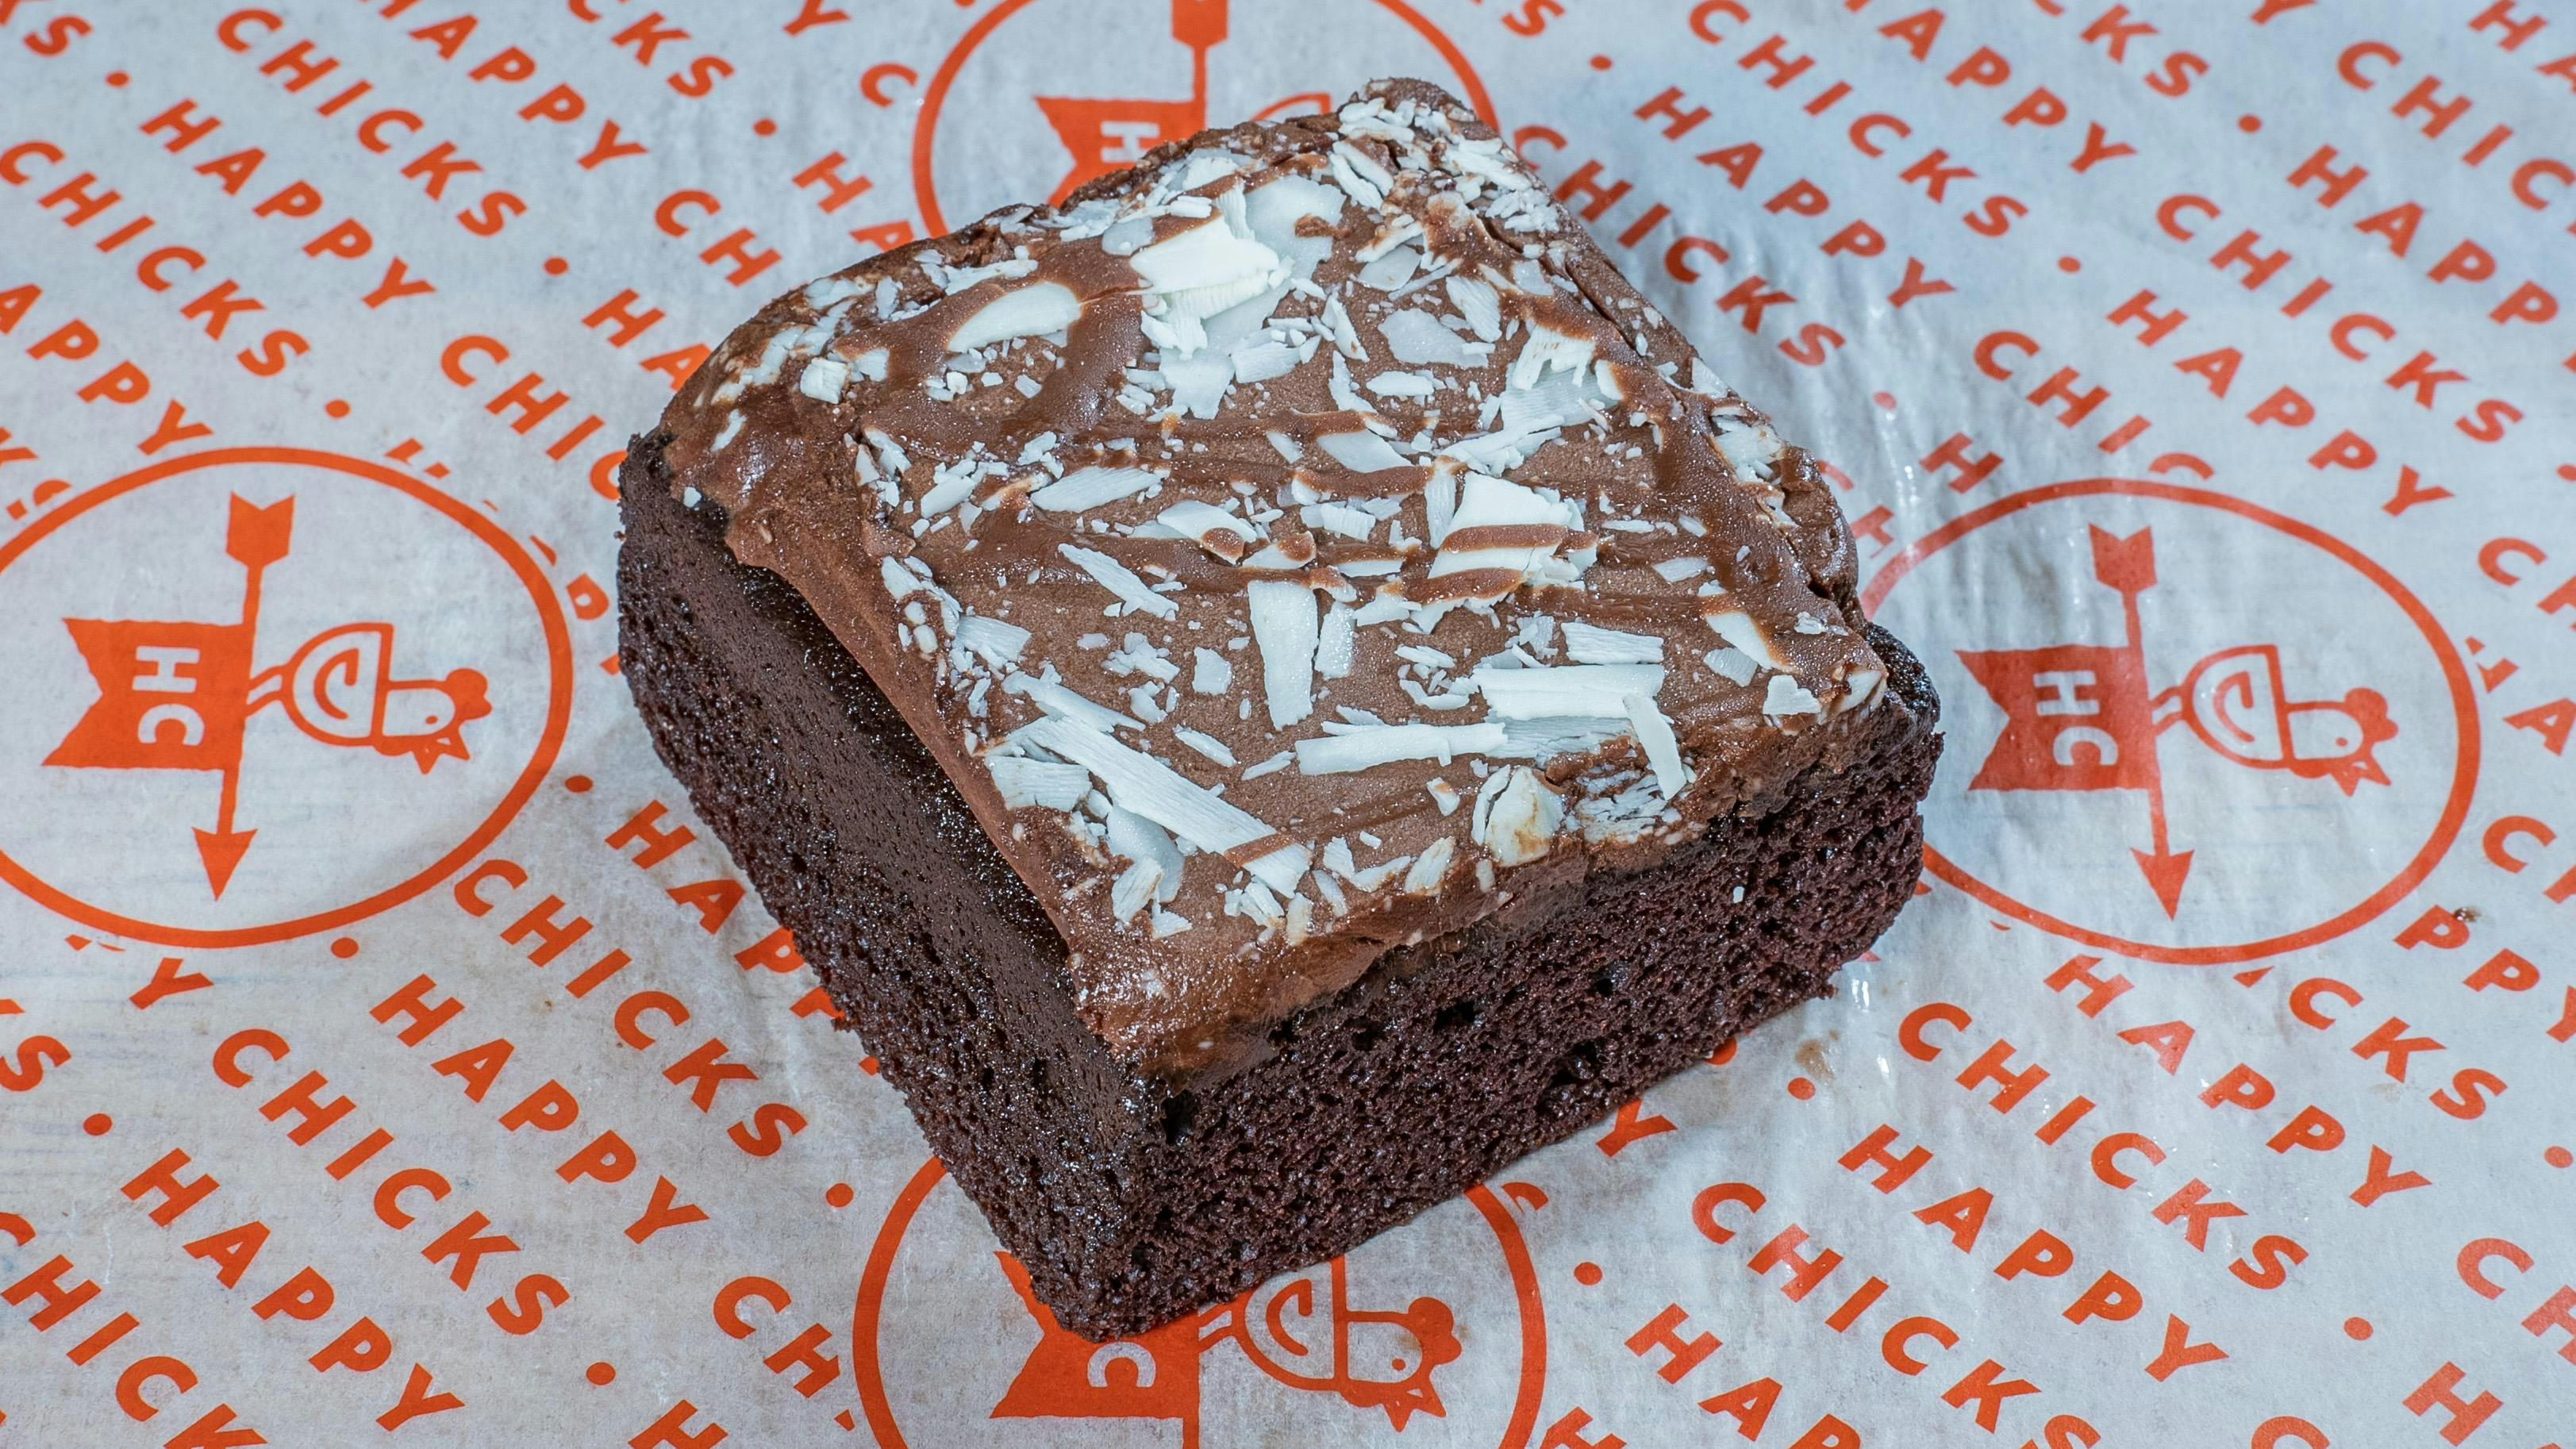 Chocolate Cake from Happy Chicks - Burnet Rd in Austin, TX